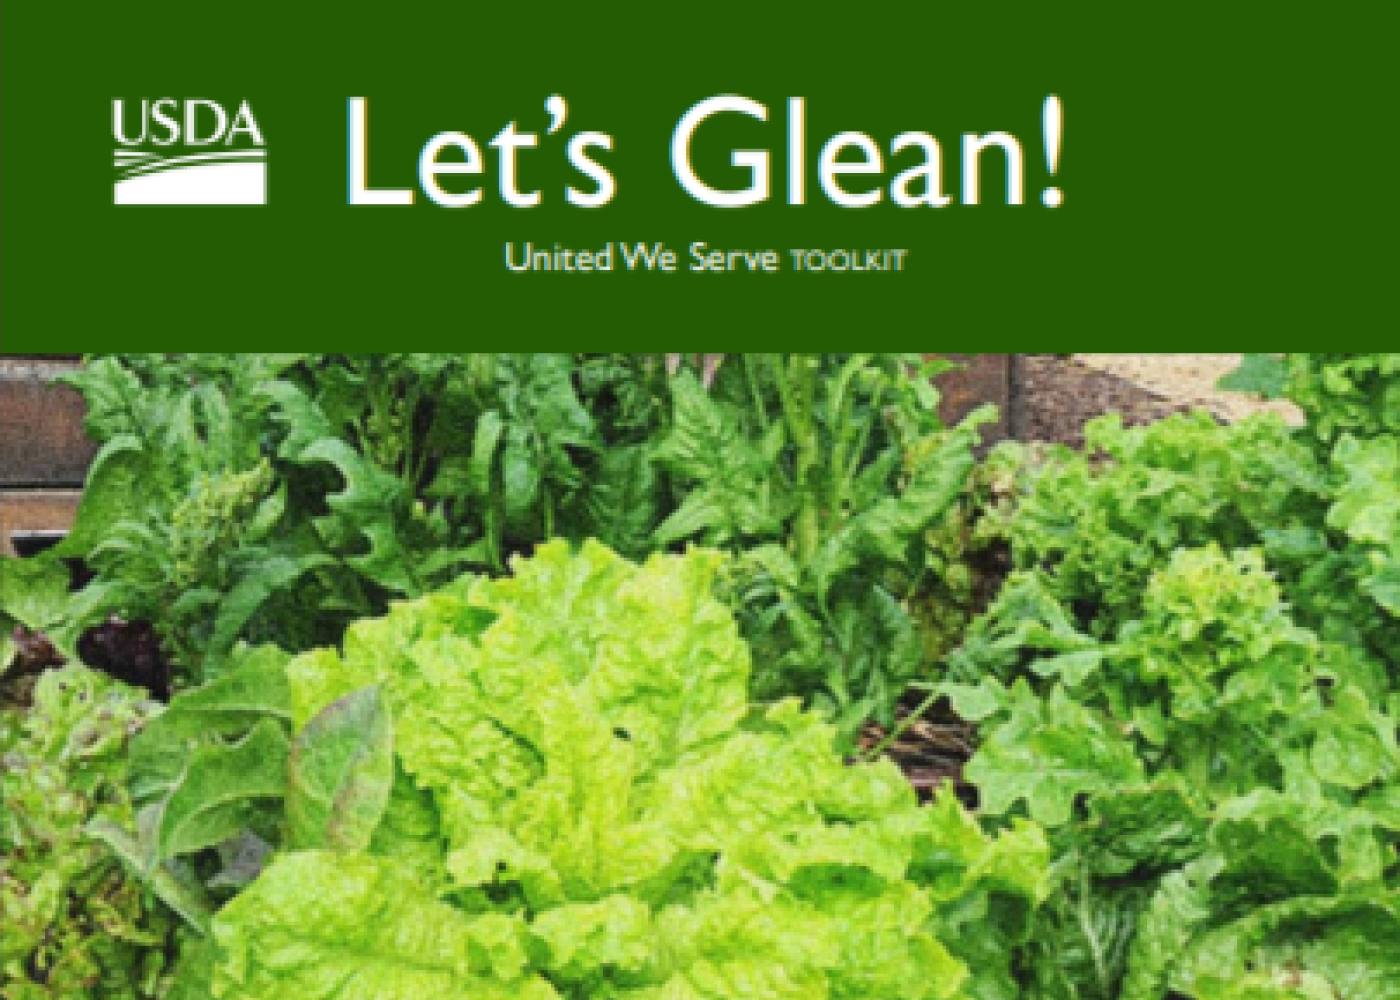 Let's Glean USDA Guide with lettuce